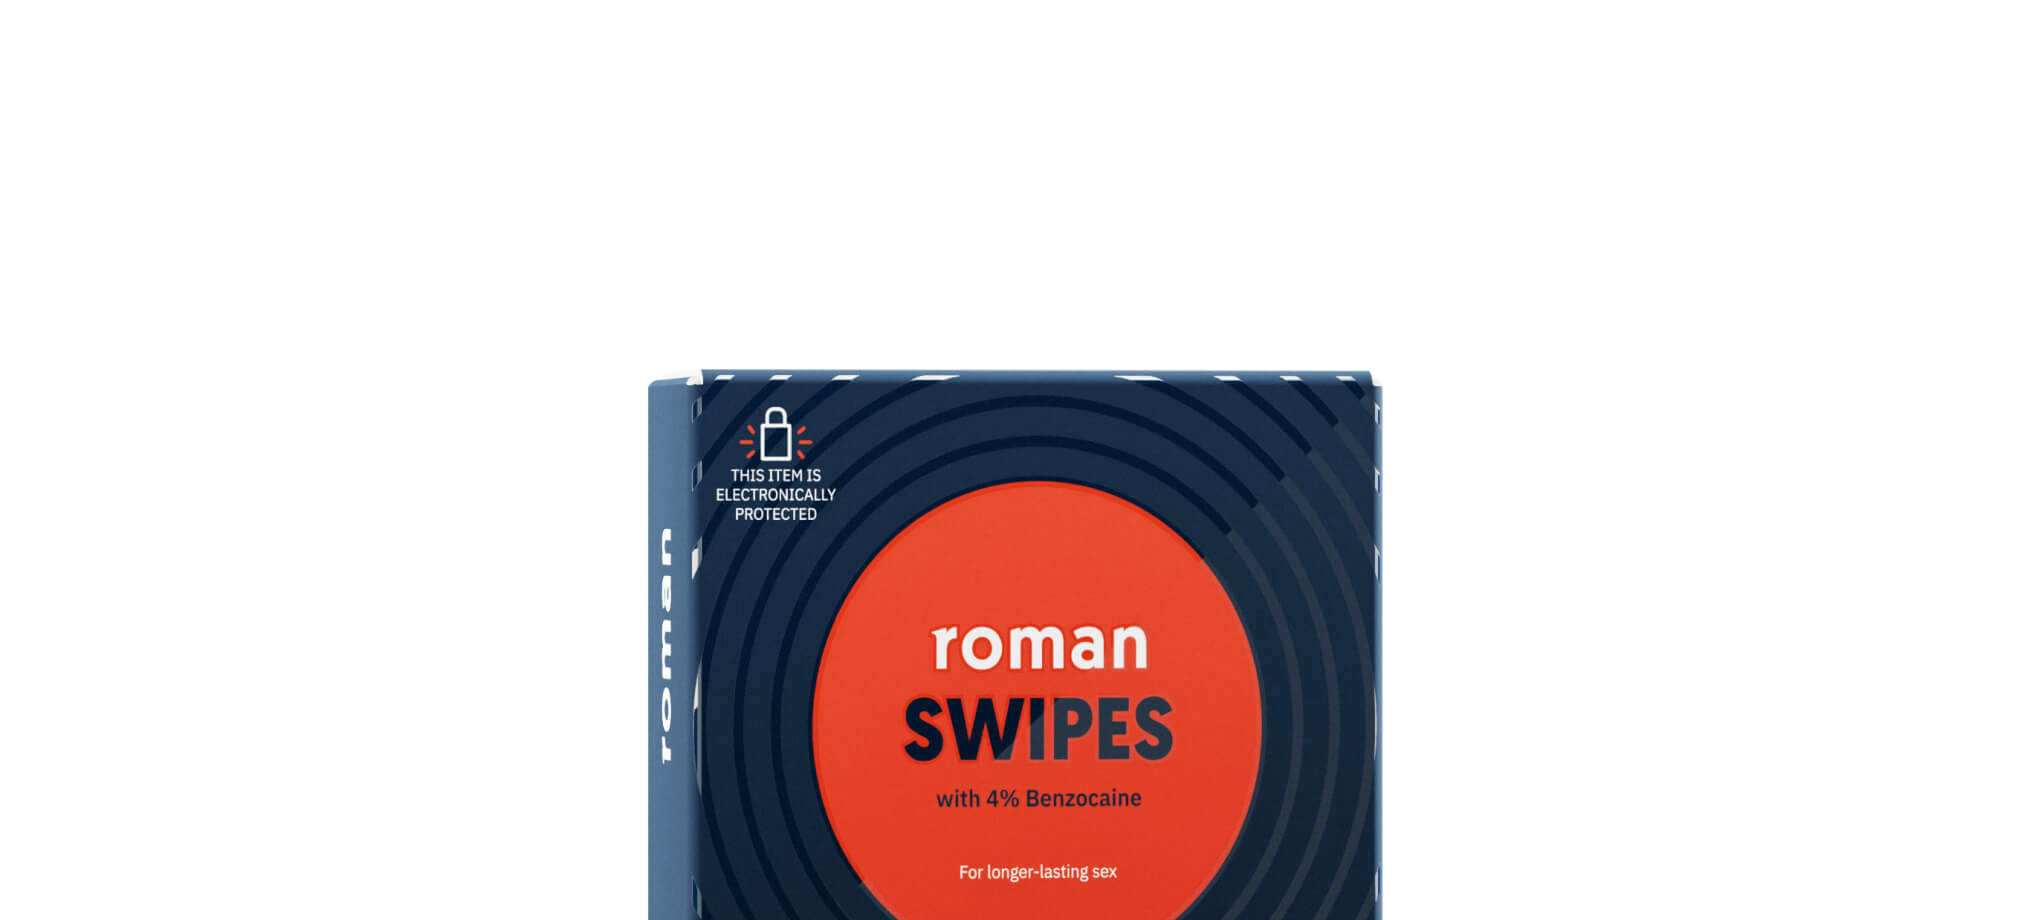 Benzocaine wipes with Roman swipe packets